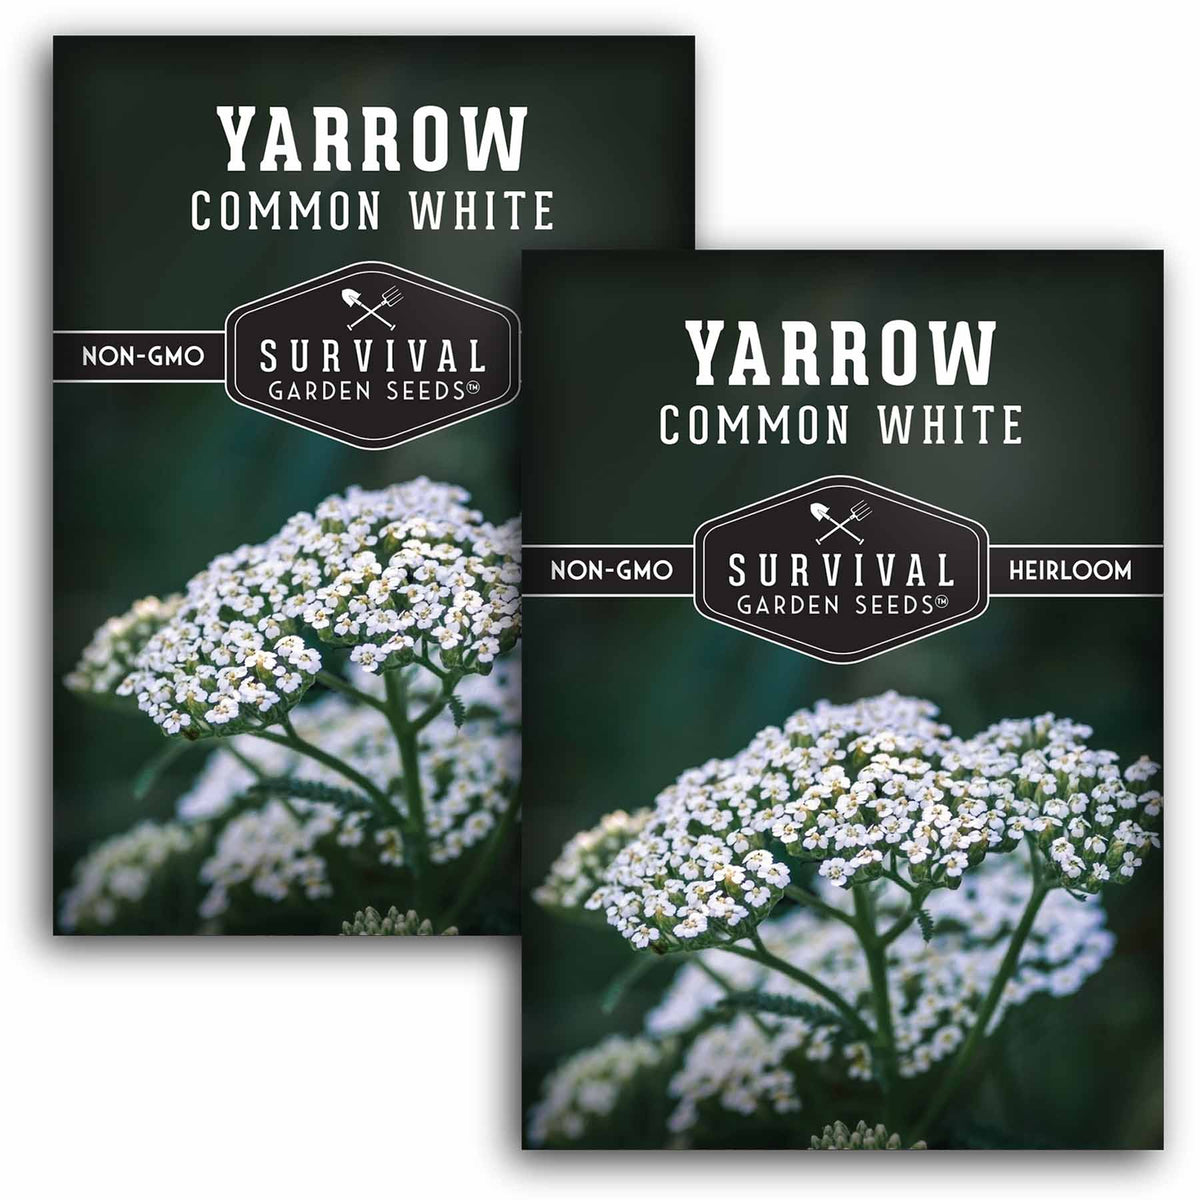 2 packets of White Yarrow seeds